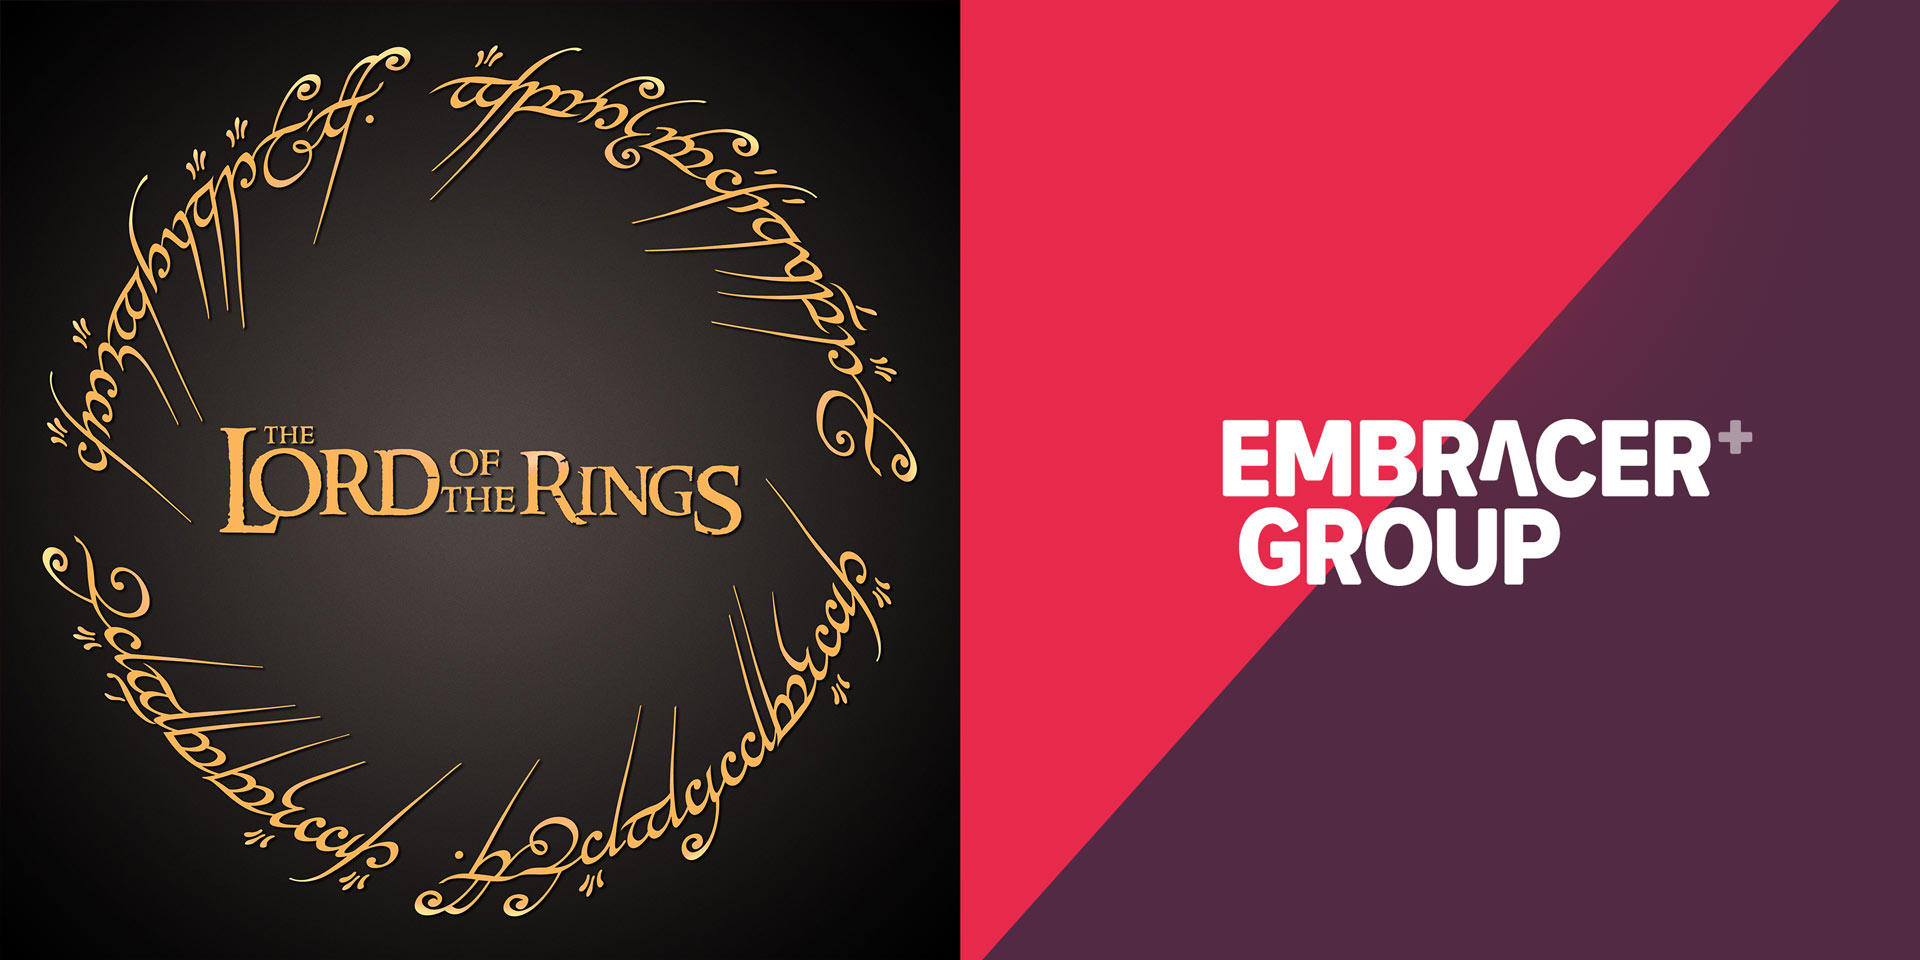 Embracer Group مالکیت Lord of The Rings را به دست آورد